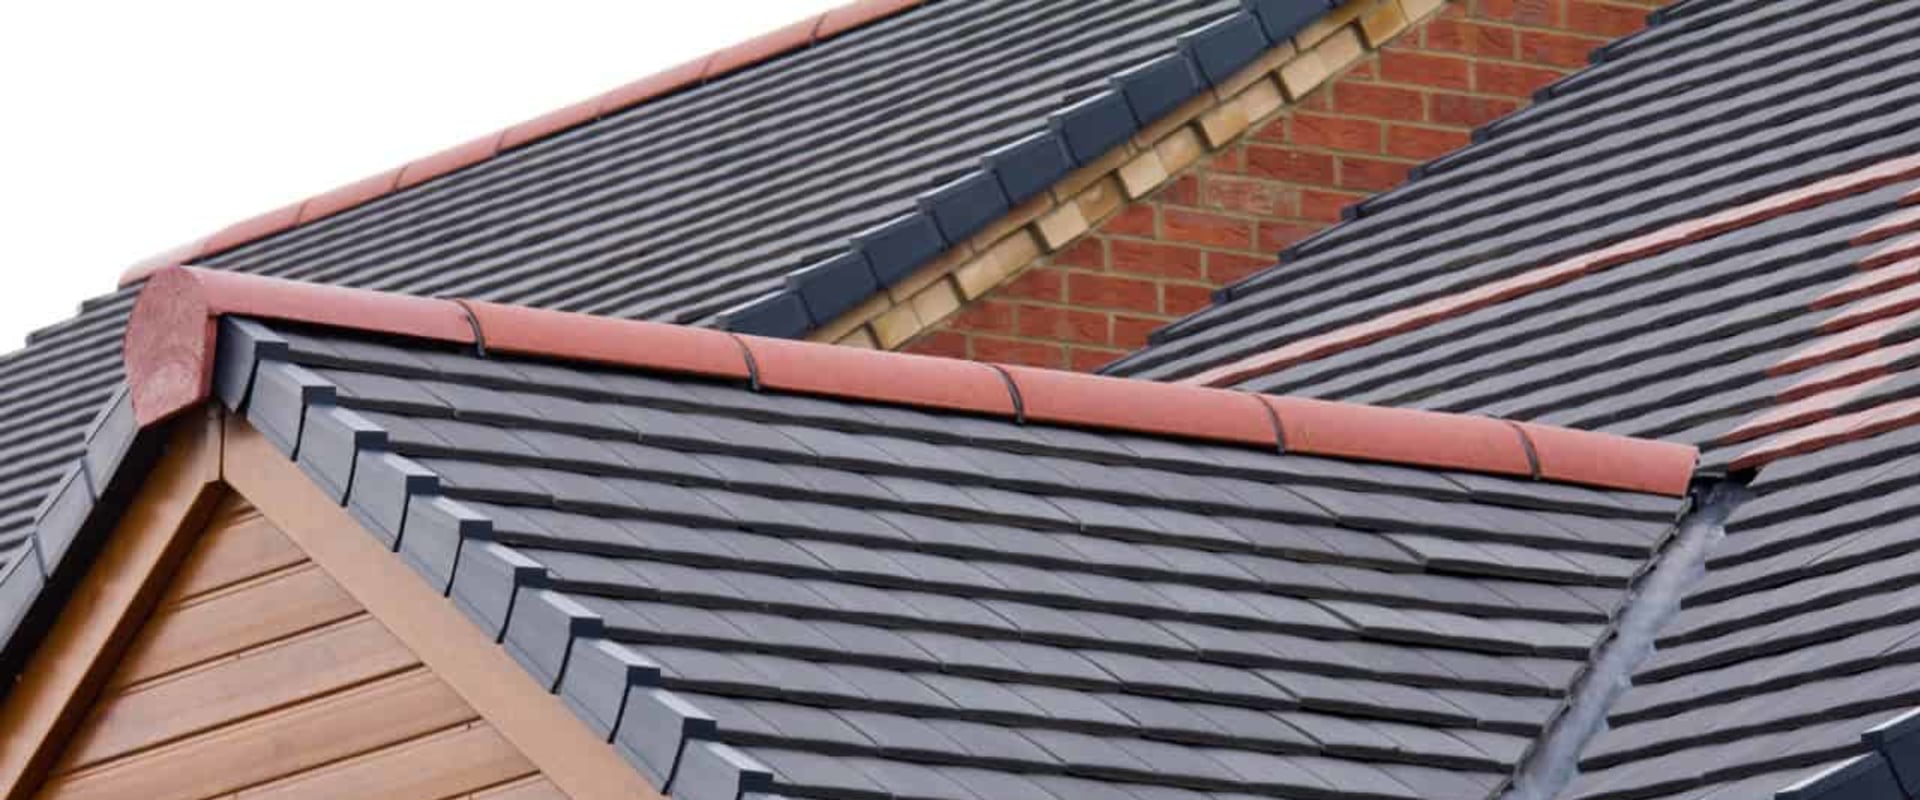 Roofing Material Selection: Everything You Need to Know